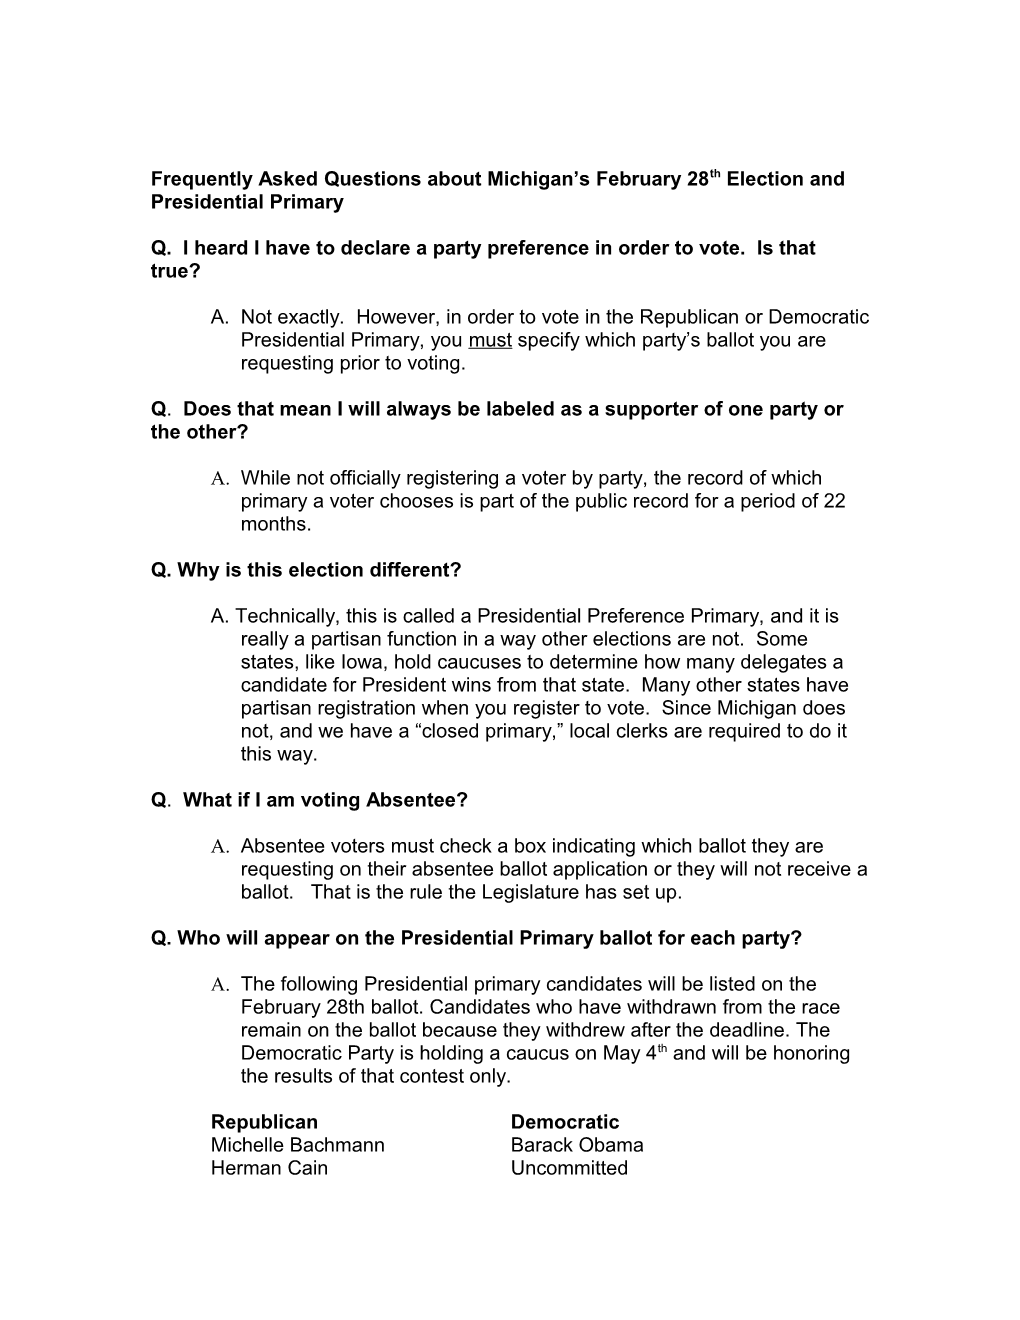 Frequently Asked Questions About Michigan S February 28Th Election and Presidential Primary